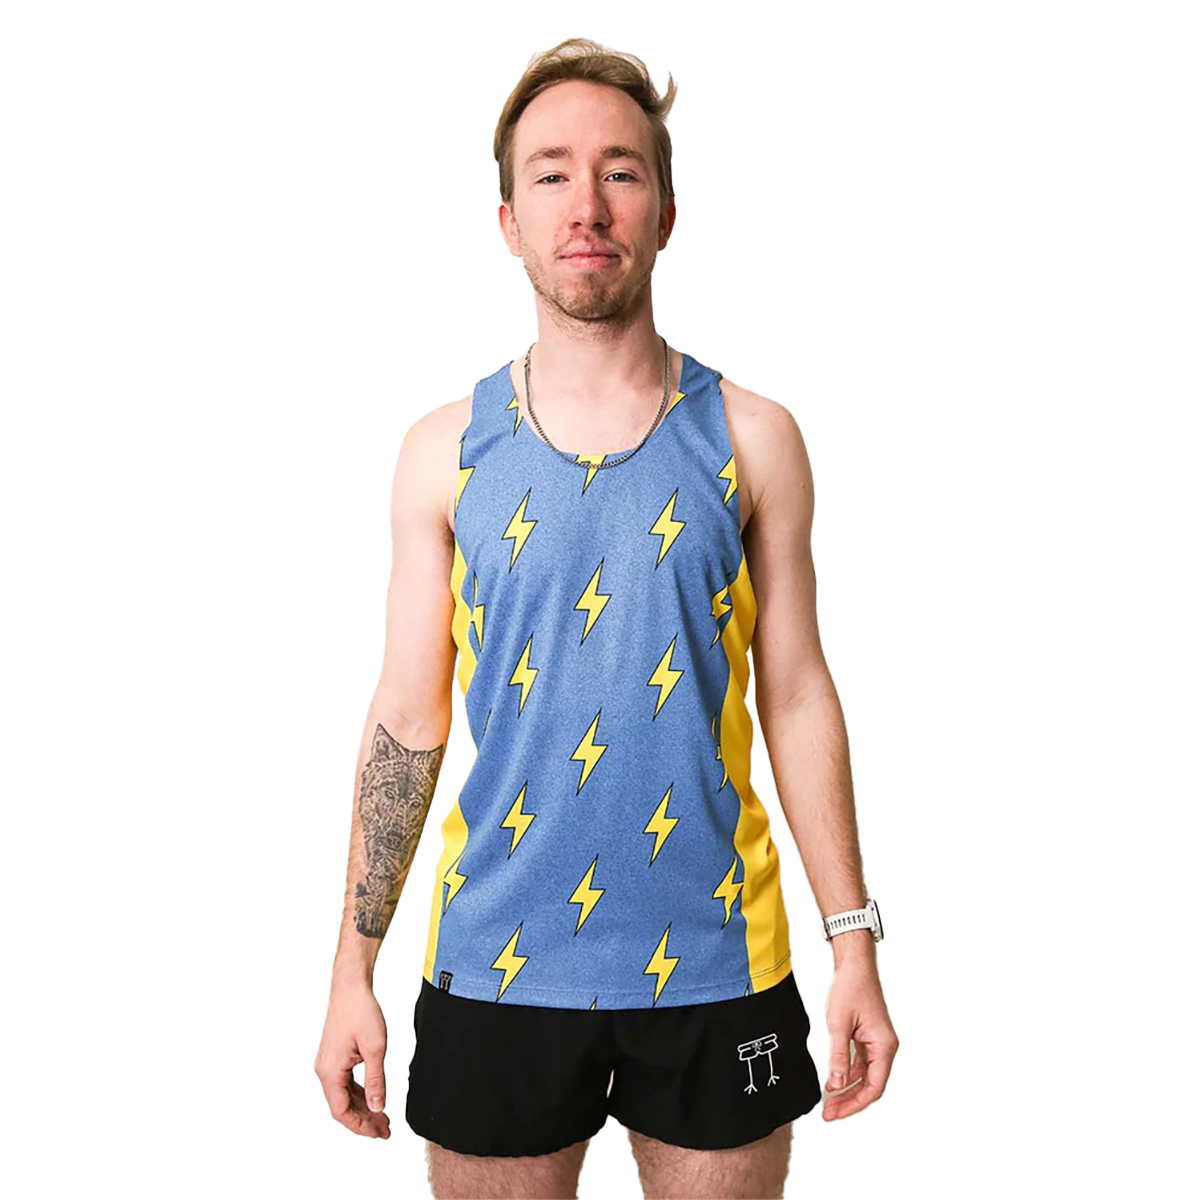 ChicknLegs Performance Singlet, , large image number null